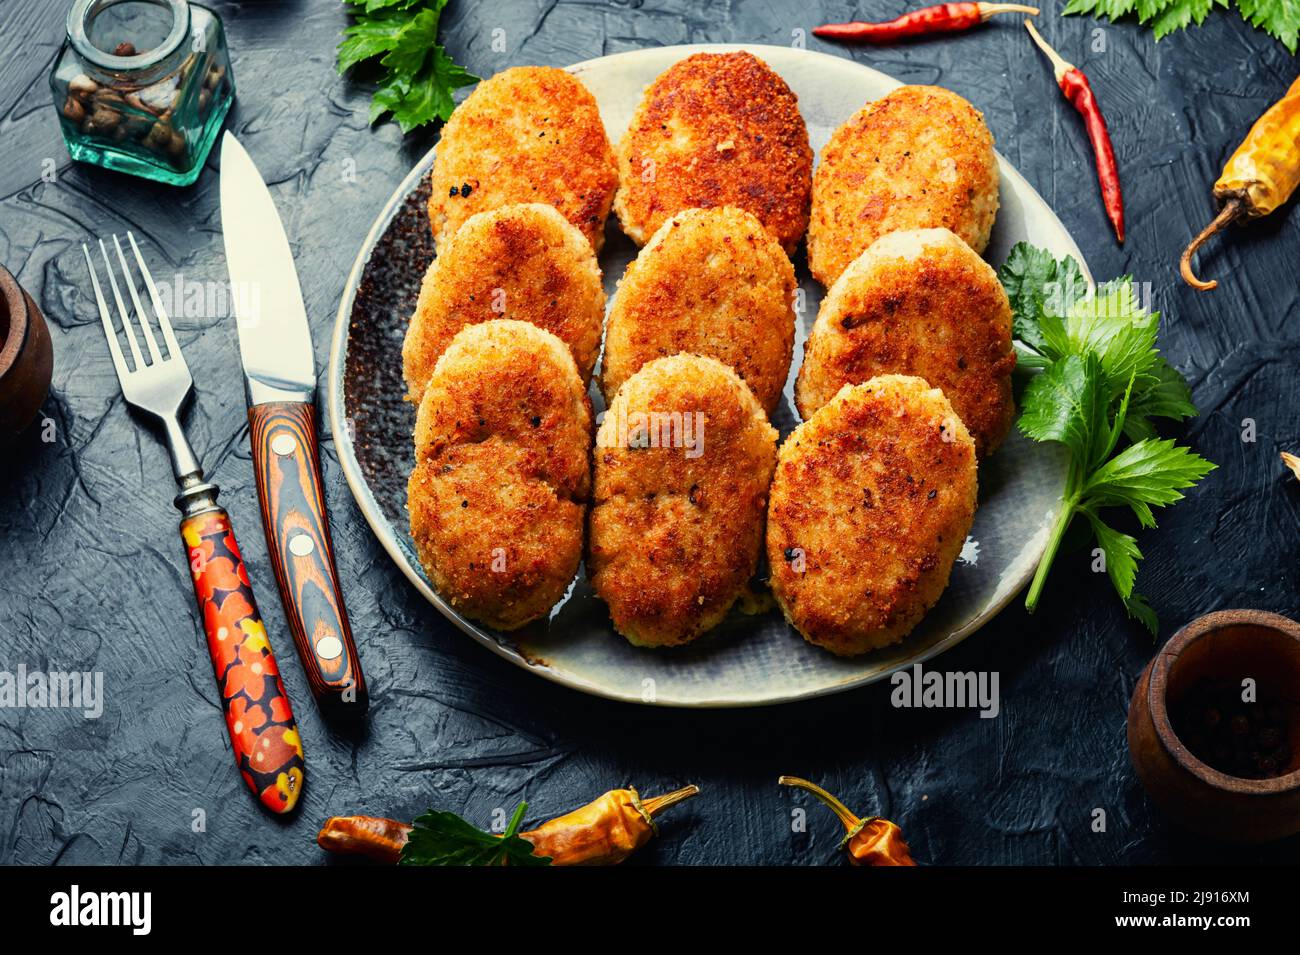 Homemade fried minced fish cutlets and fish steak Stock Photo